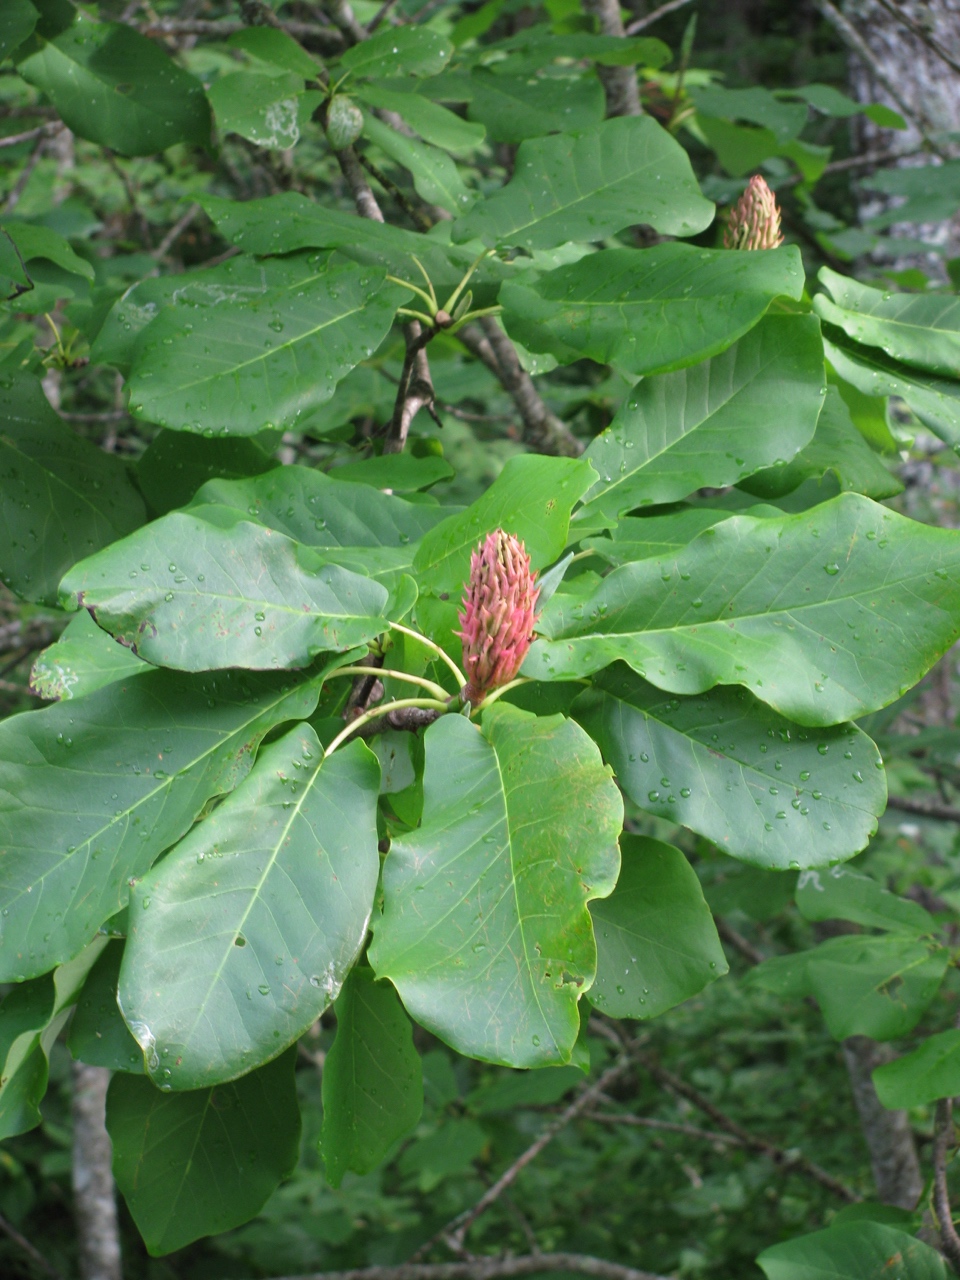 The Scientific Name is Magnolia fraseri [=Paramagnolia fraseri var. fraseri]. You will likely hear them called Fraser Magnolia, Mountain Magnolia, Fraser’s Magnolia, Earleaf Umbrella-tree, Eared Magnolia. This picture shows the Developing fruit in late July of Magnolia fraseri [=Paramagnolia fraseri var. fraseri]